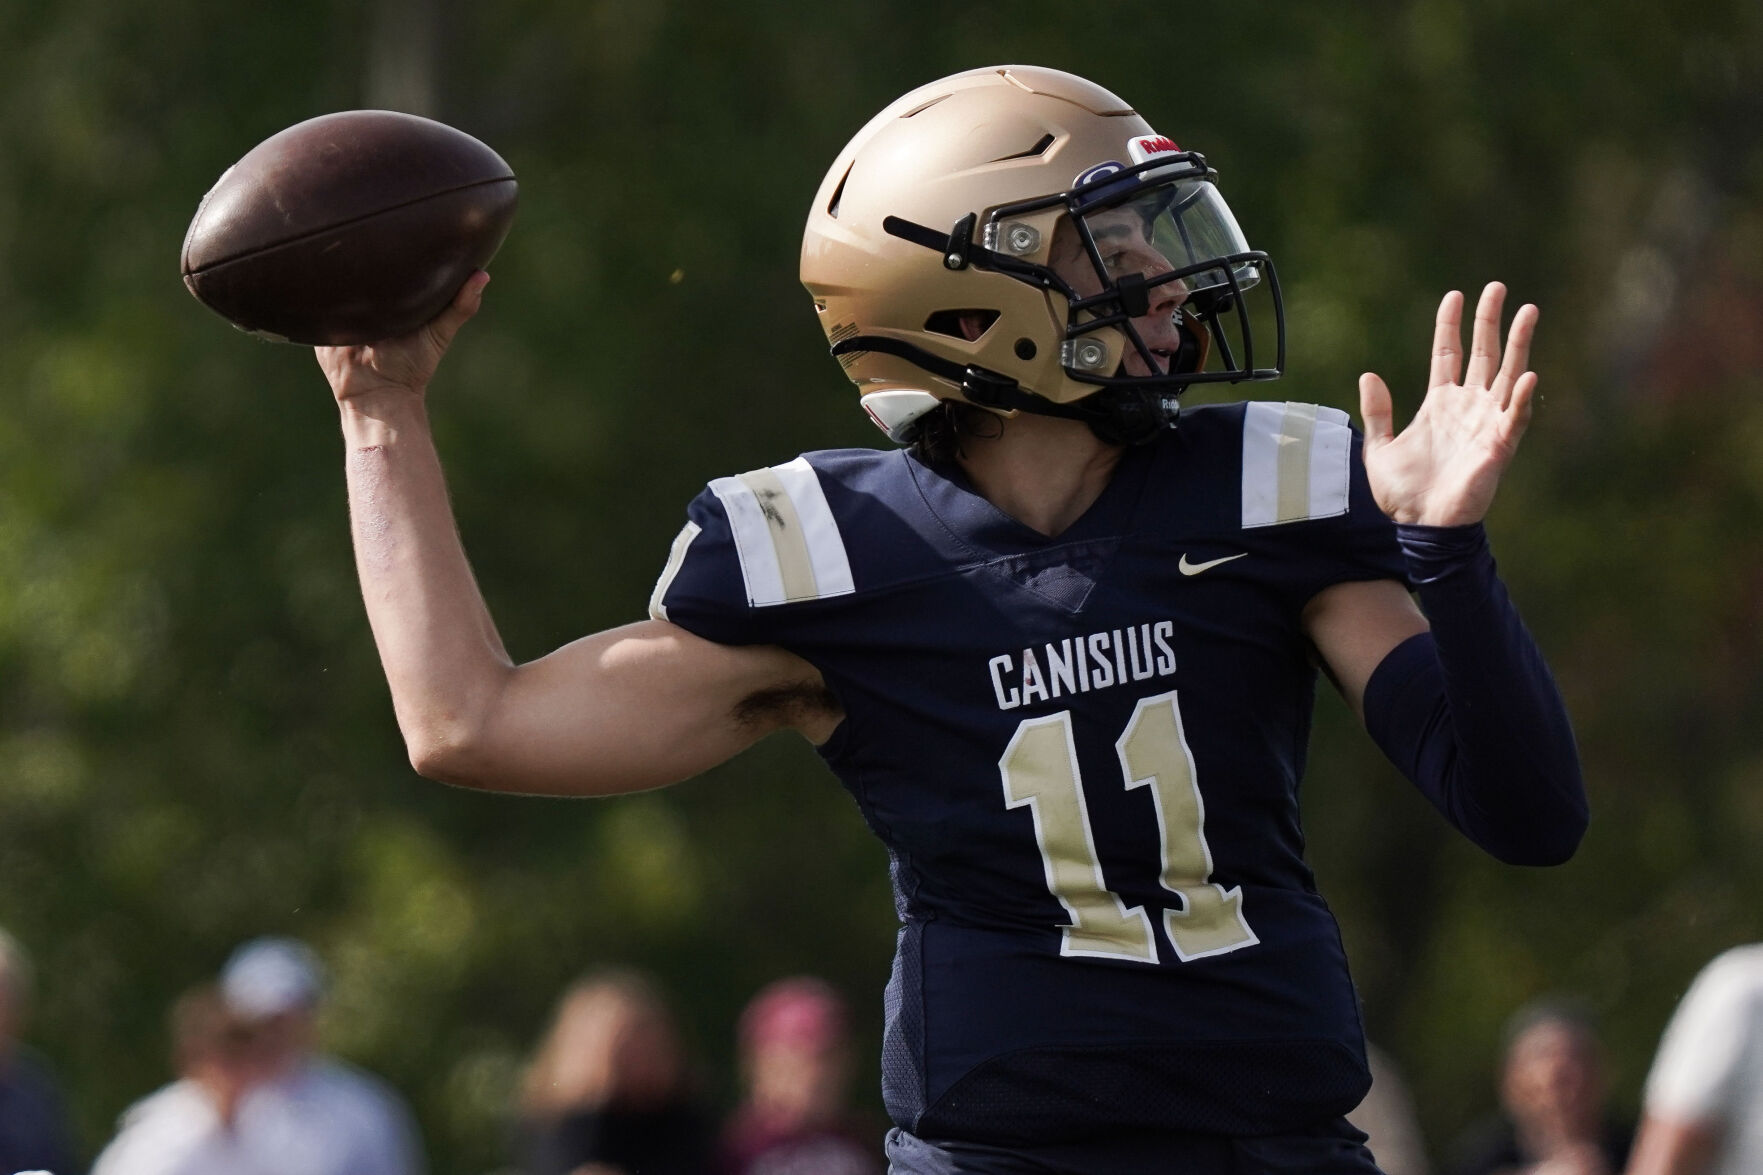 Connolly Cup honorees for Week 6 in high school football